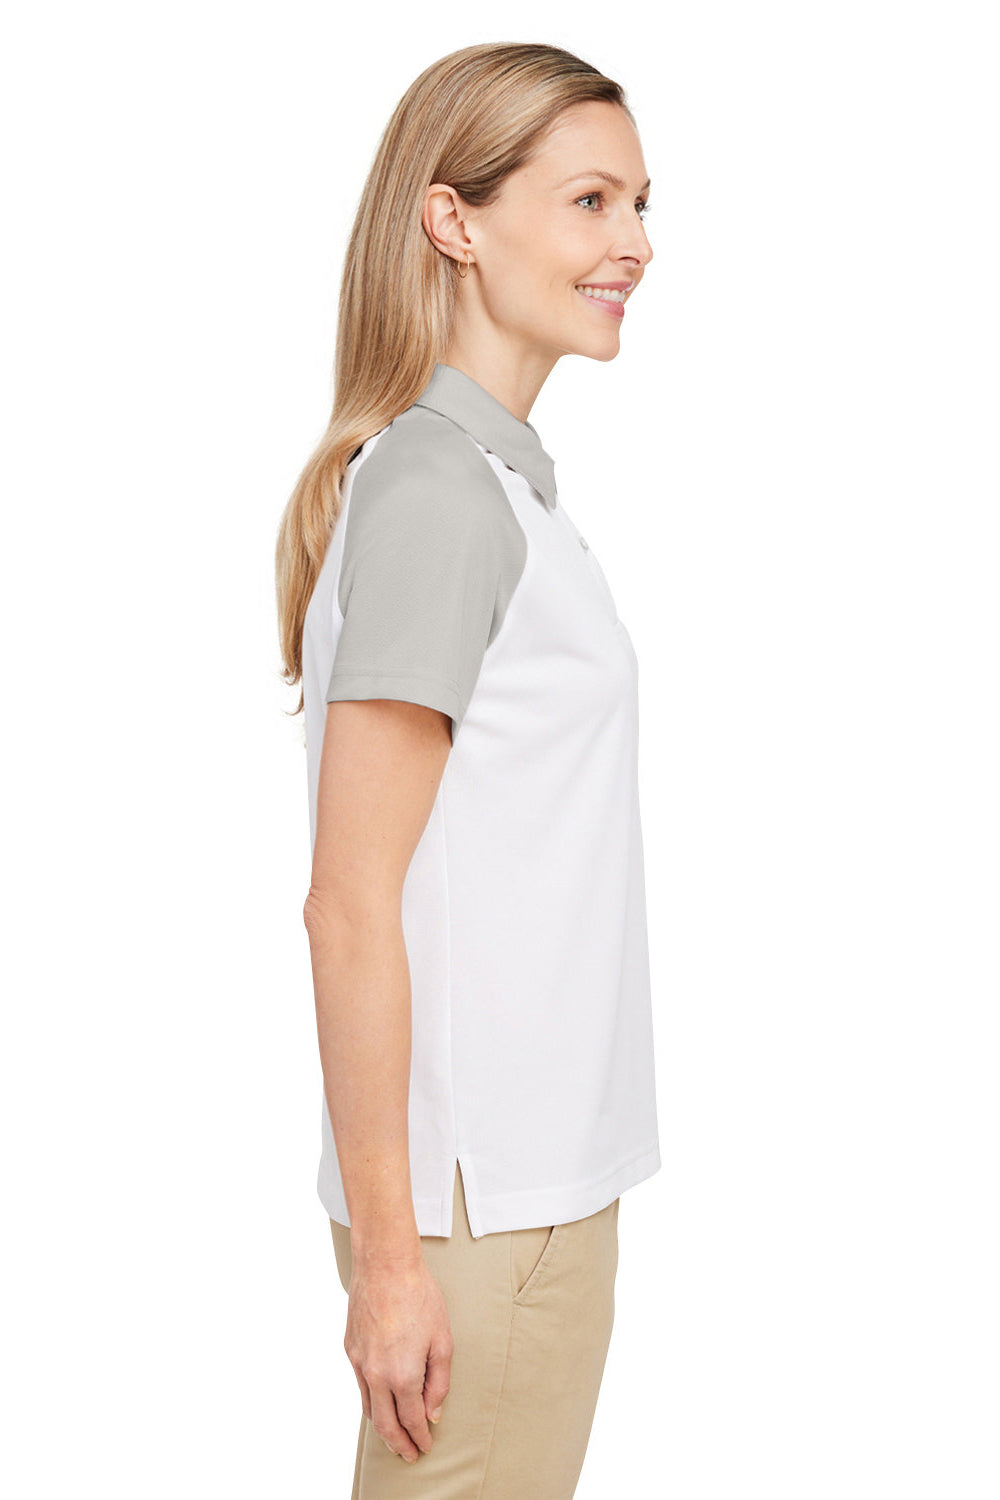 Team 365 TT21CW Womens Command Colorblock Moisture Wicking Short Sleeve Polo Shirt White/Silver Grey Side